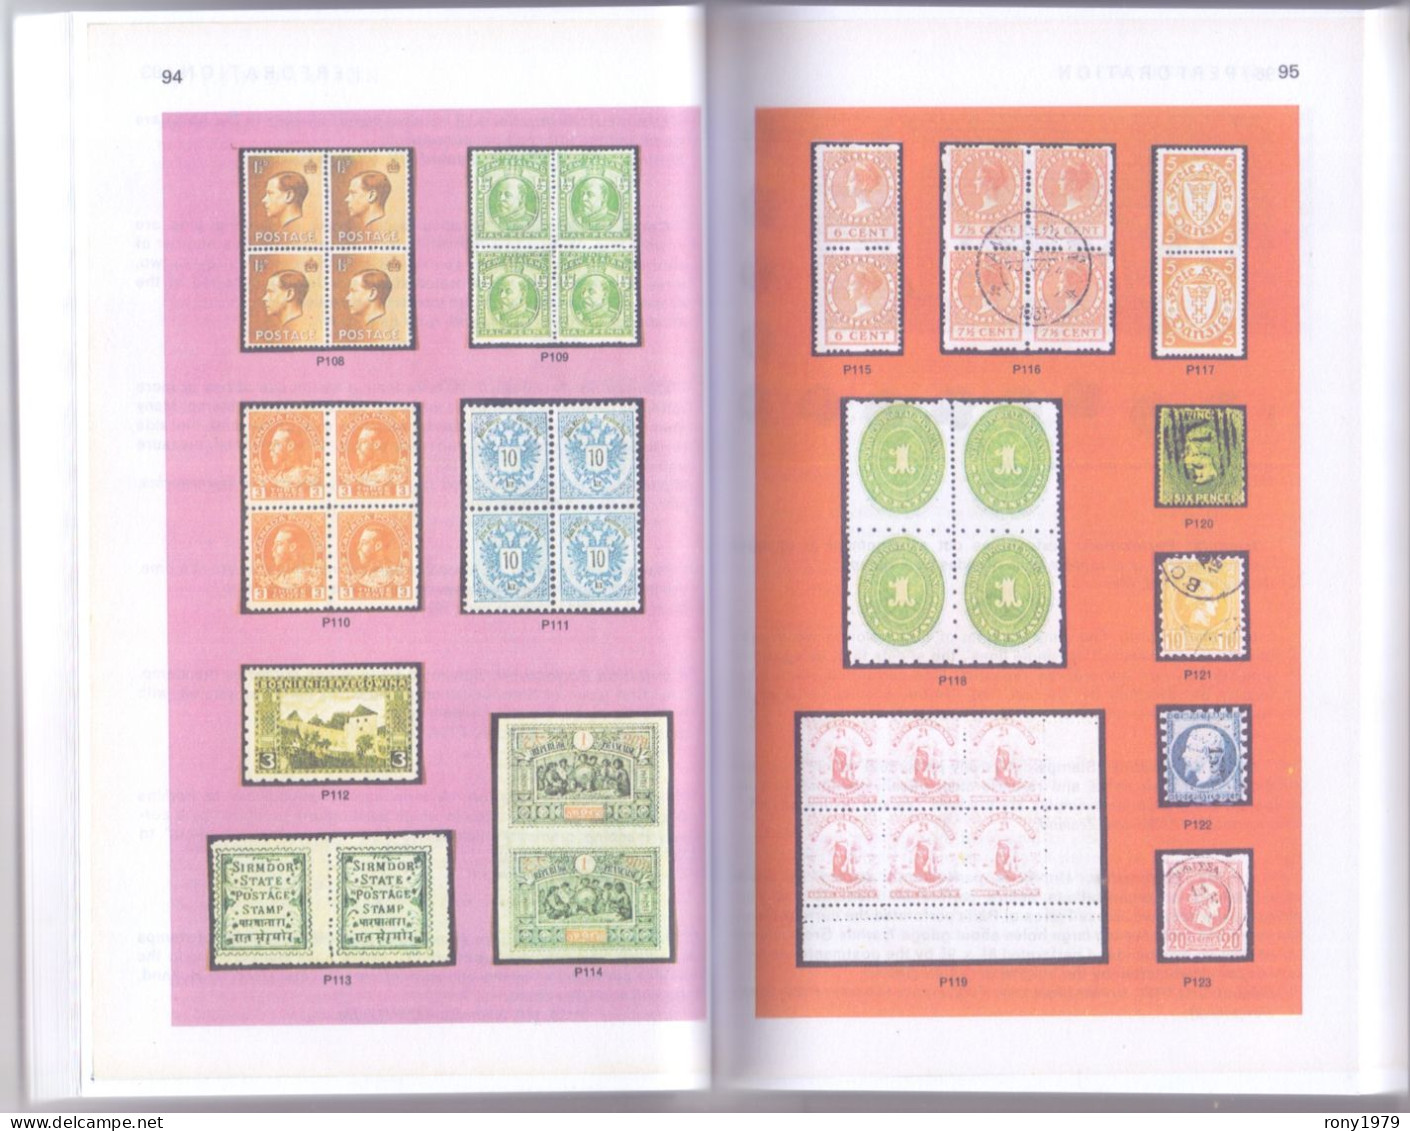 Philatelic Terms Illustrated Second Edition Book By Russell Bennett And James Watson (Color Copy) - Boeken Over Verzamelen